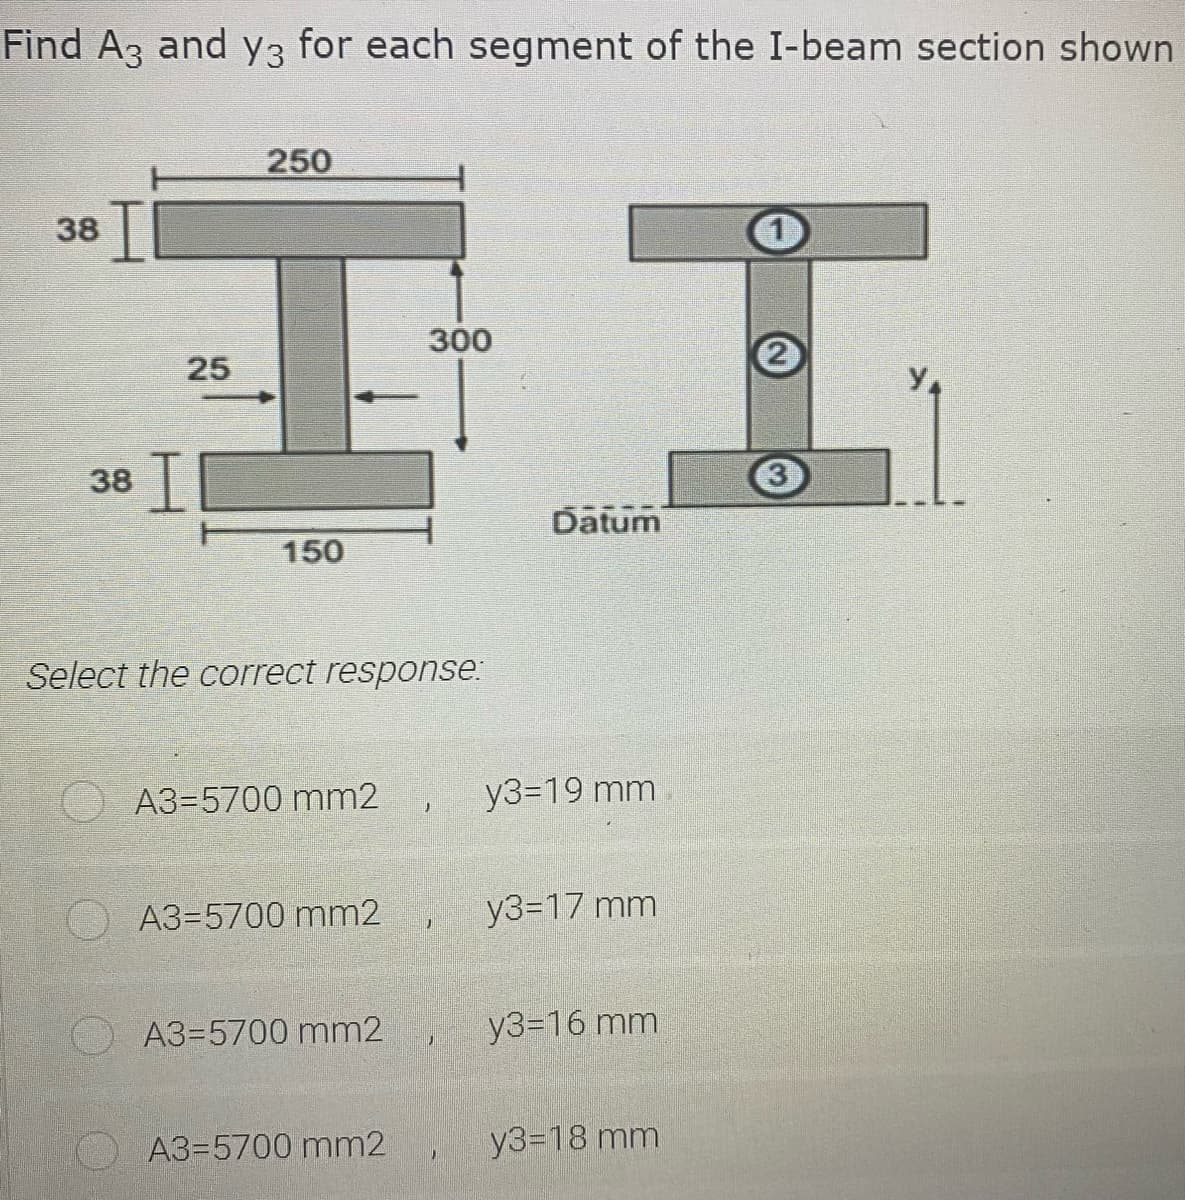 Find A3 and y3 for each segment of the I-beam section shown
エエ
250
38
300
25
2
38 ||
3
Datum
150
Select the correct response:
A3=5700 mm2
y3=D19 mm
A3=5700 mm2
y3=17 mm
A3=5700 mm2
y3=16 mm
A3=5700 mm2
y3=18 mm
